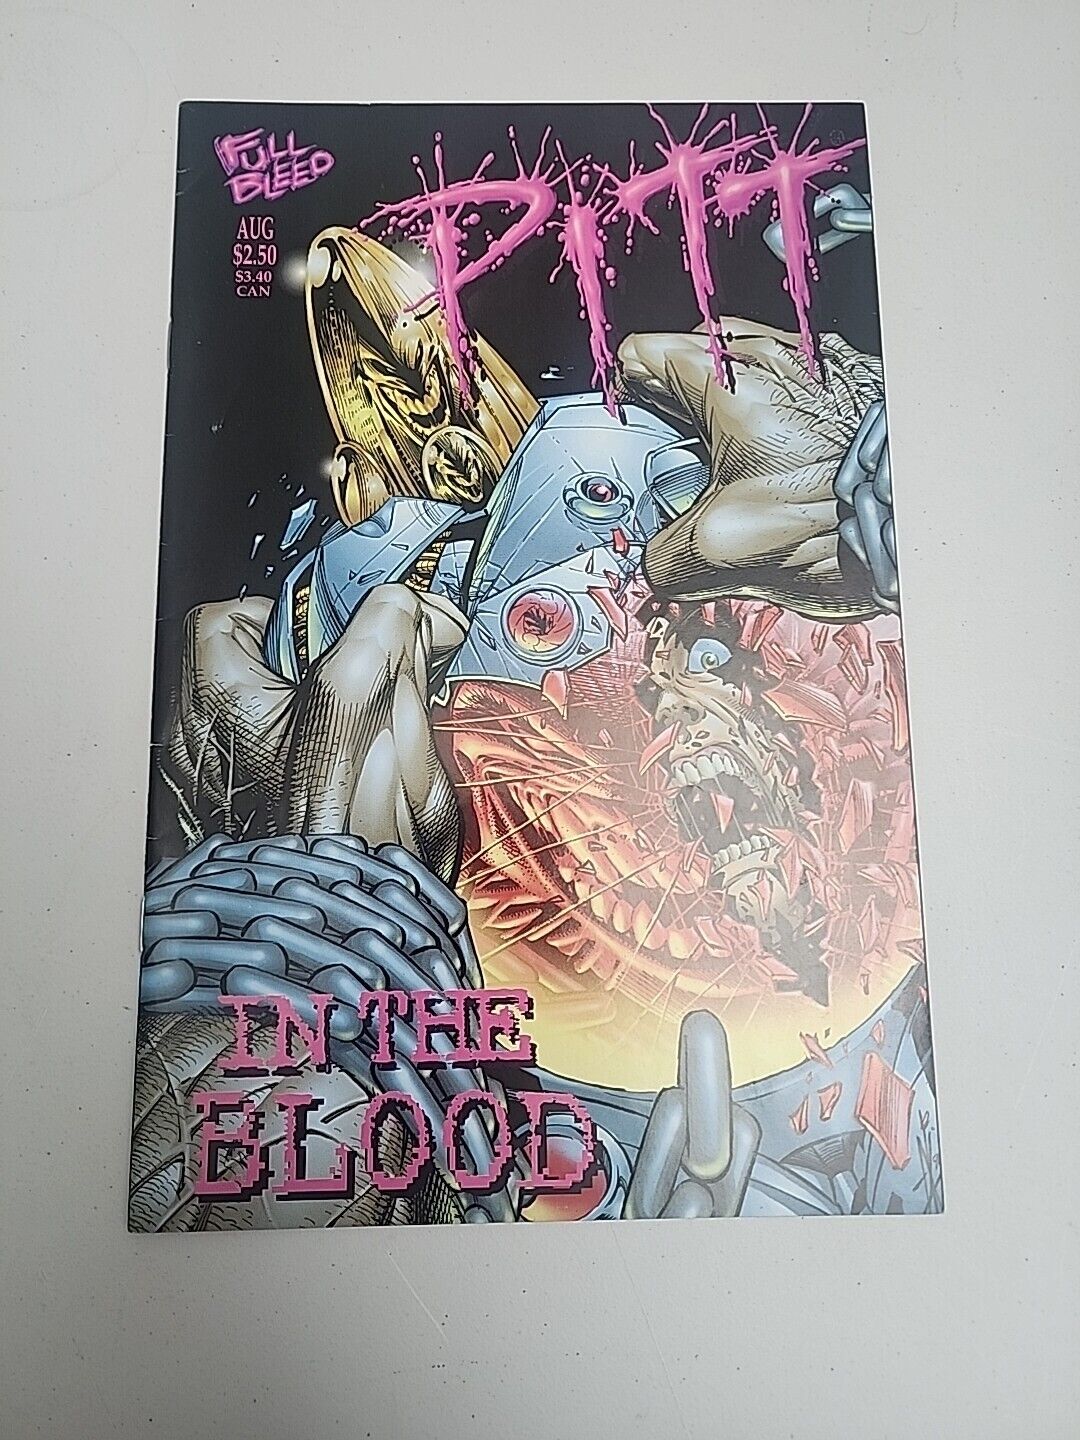 Pitt In the Blood # 1 Dale Keown Richard Pace Full Bleed 1996 1st Printing